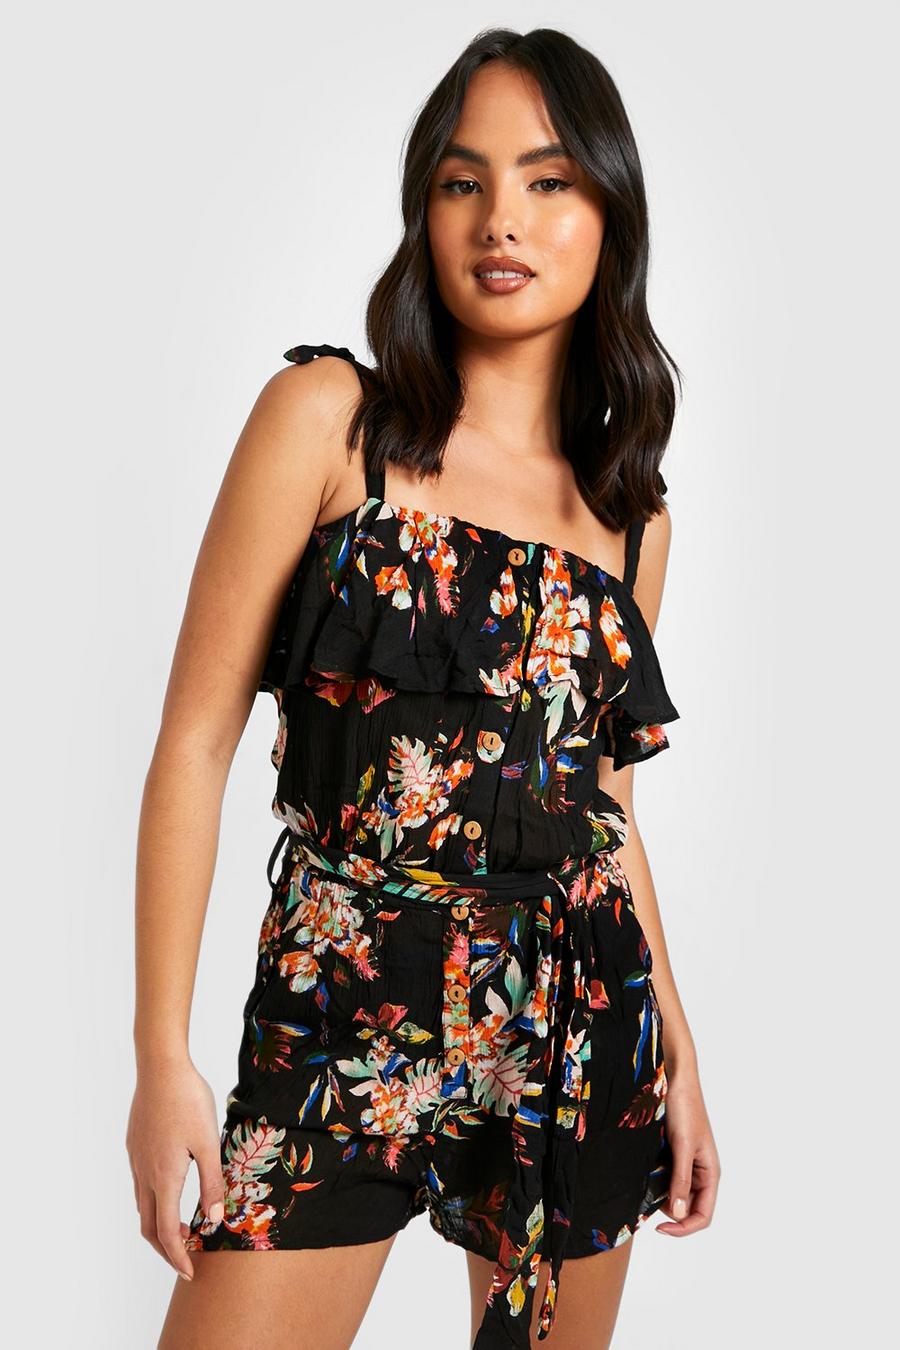 Boohoo Floral V Neck Flippy Romper in Black Womens Clothing Jumpsuits and rompers Playsuits 